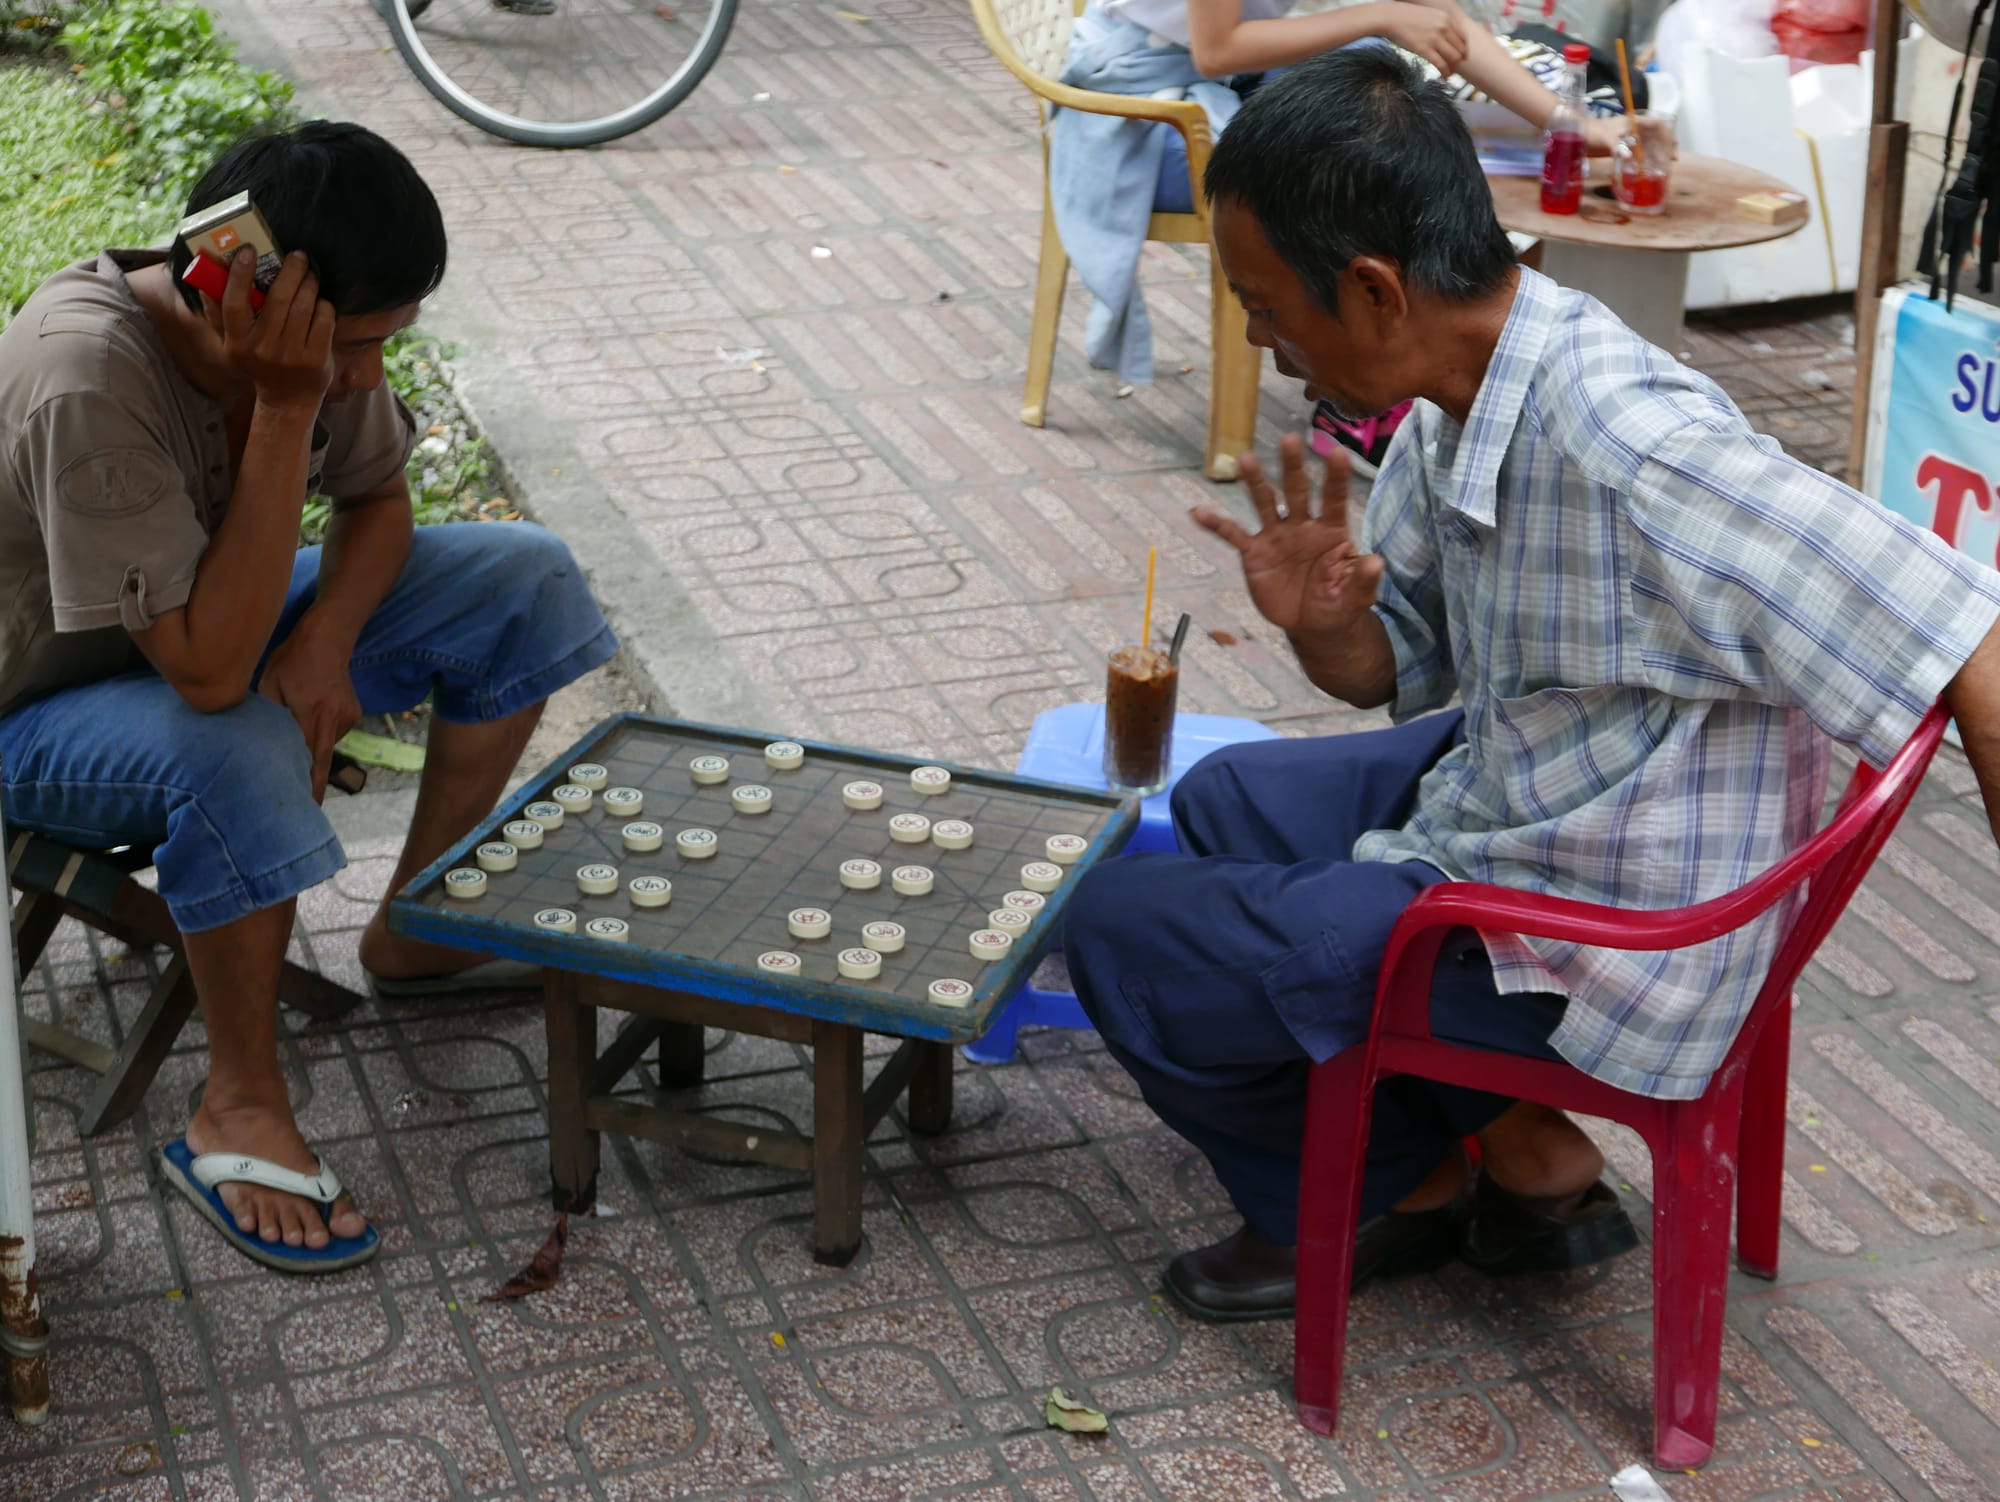 Photo by Author — playing games — photos from around Ho Chi Minh City (Saigon), Vietnam